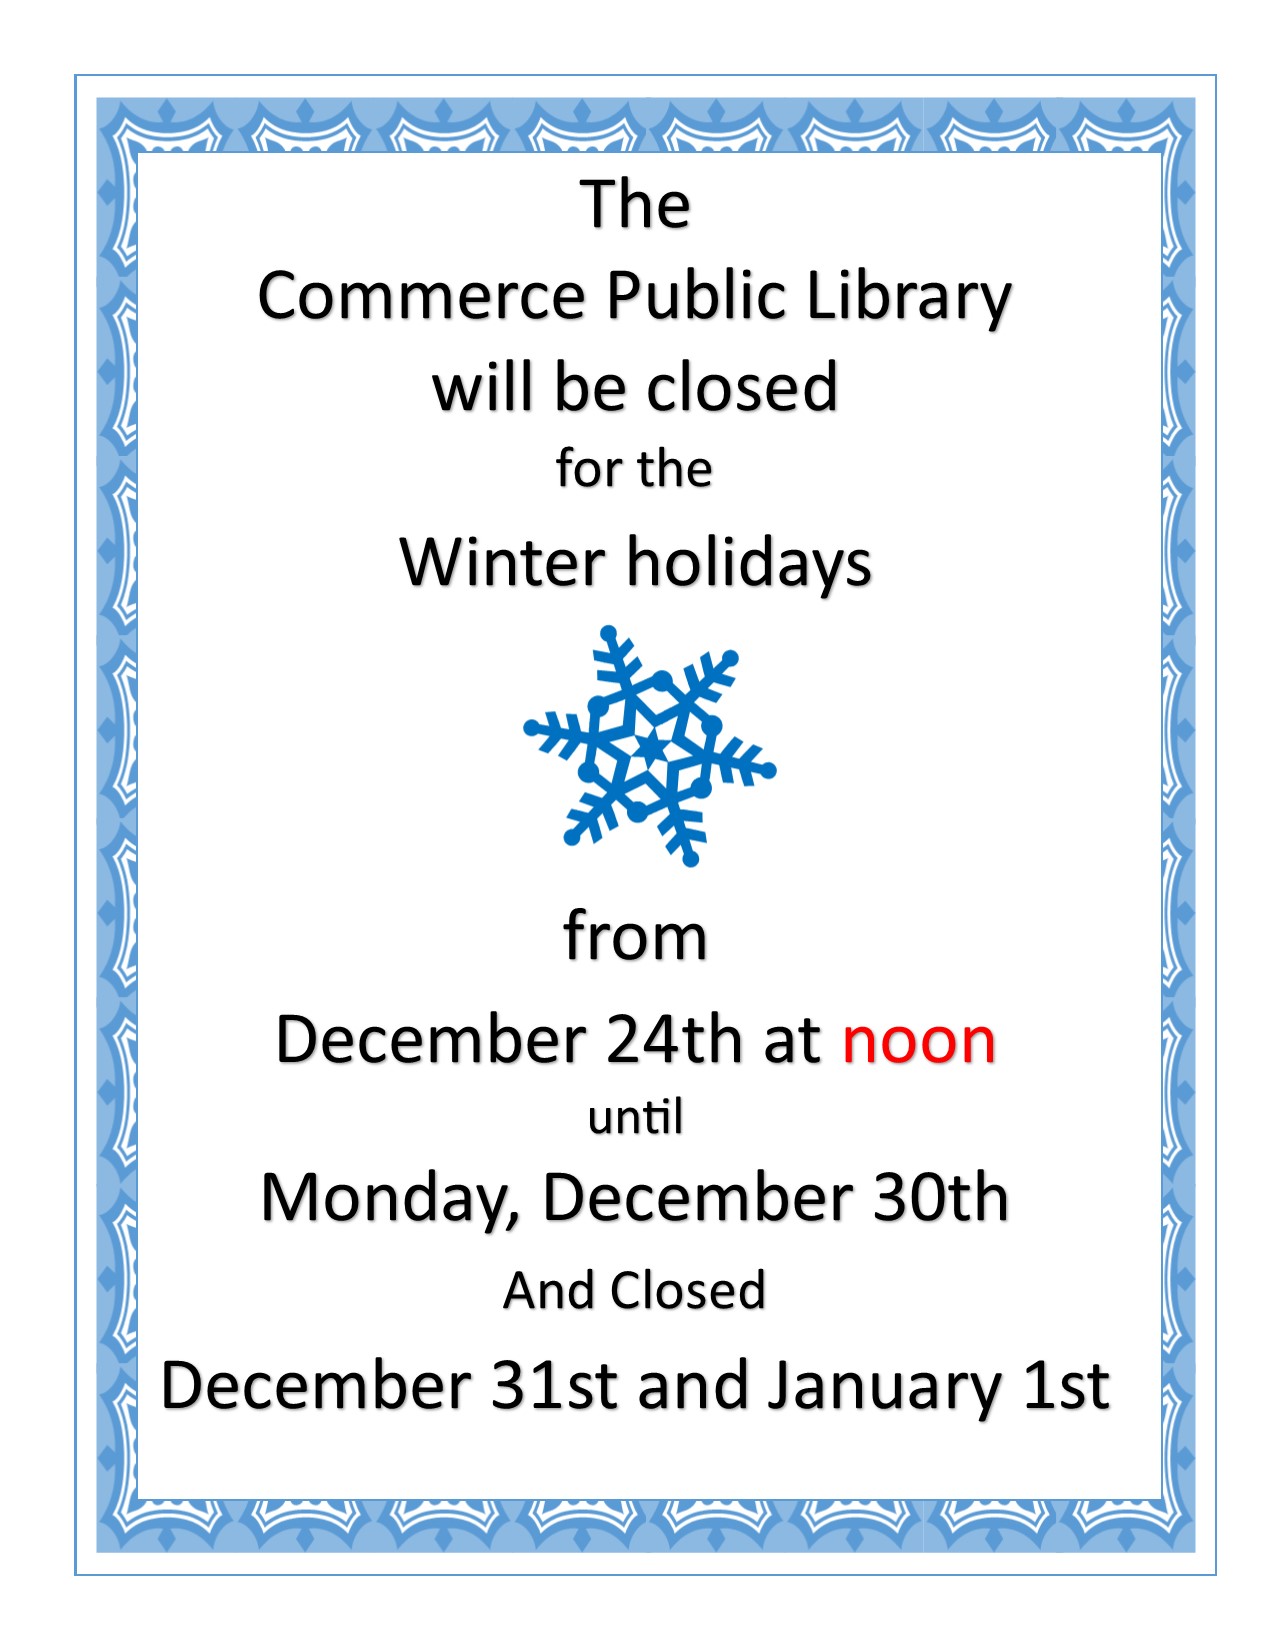 closed for winter holidays 2019 2.jpg